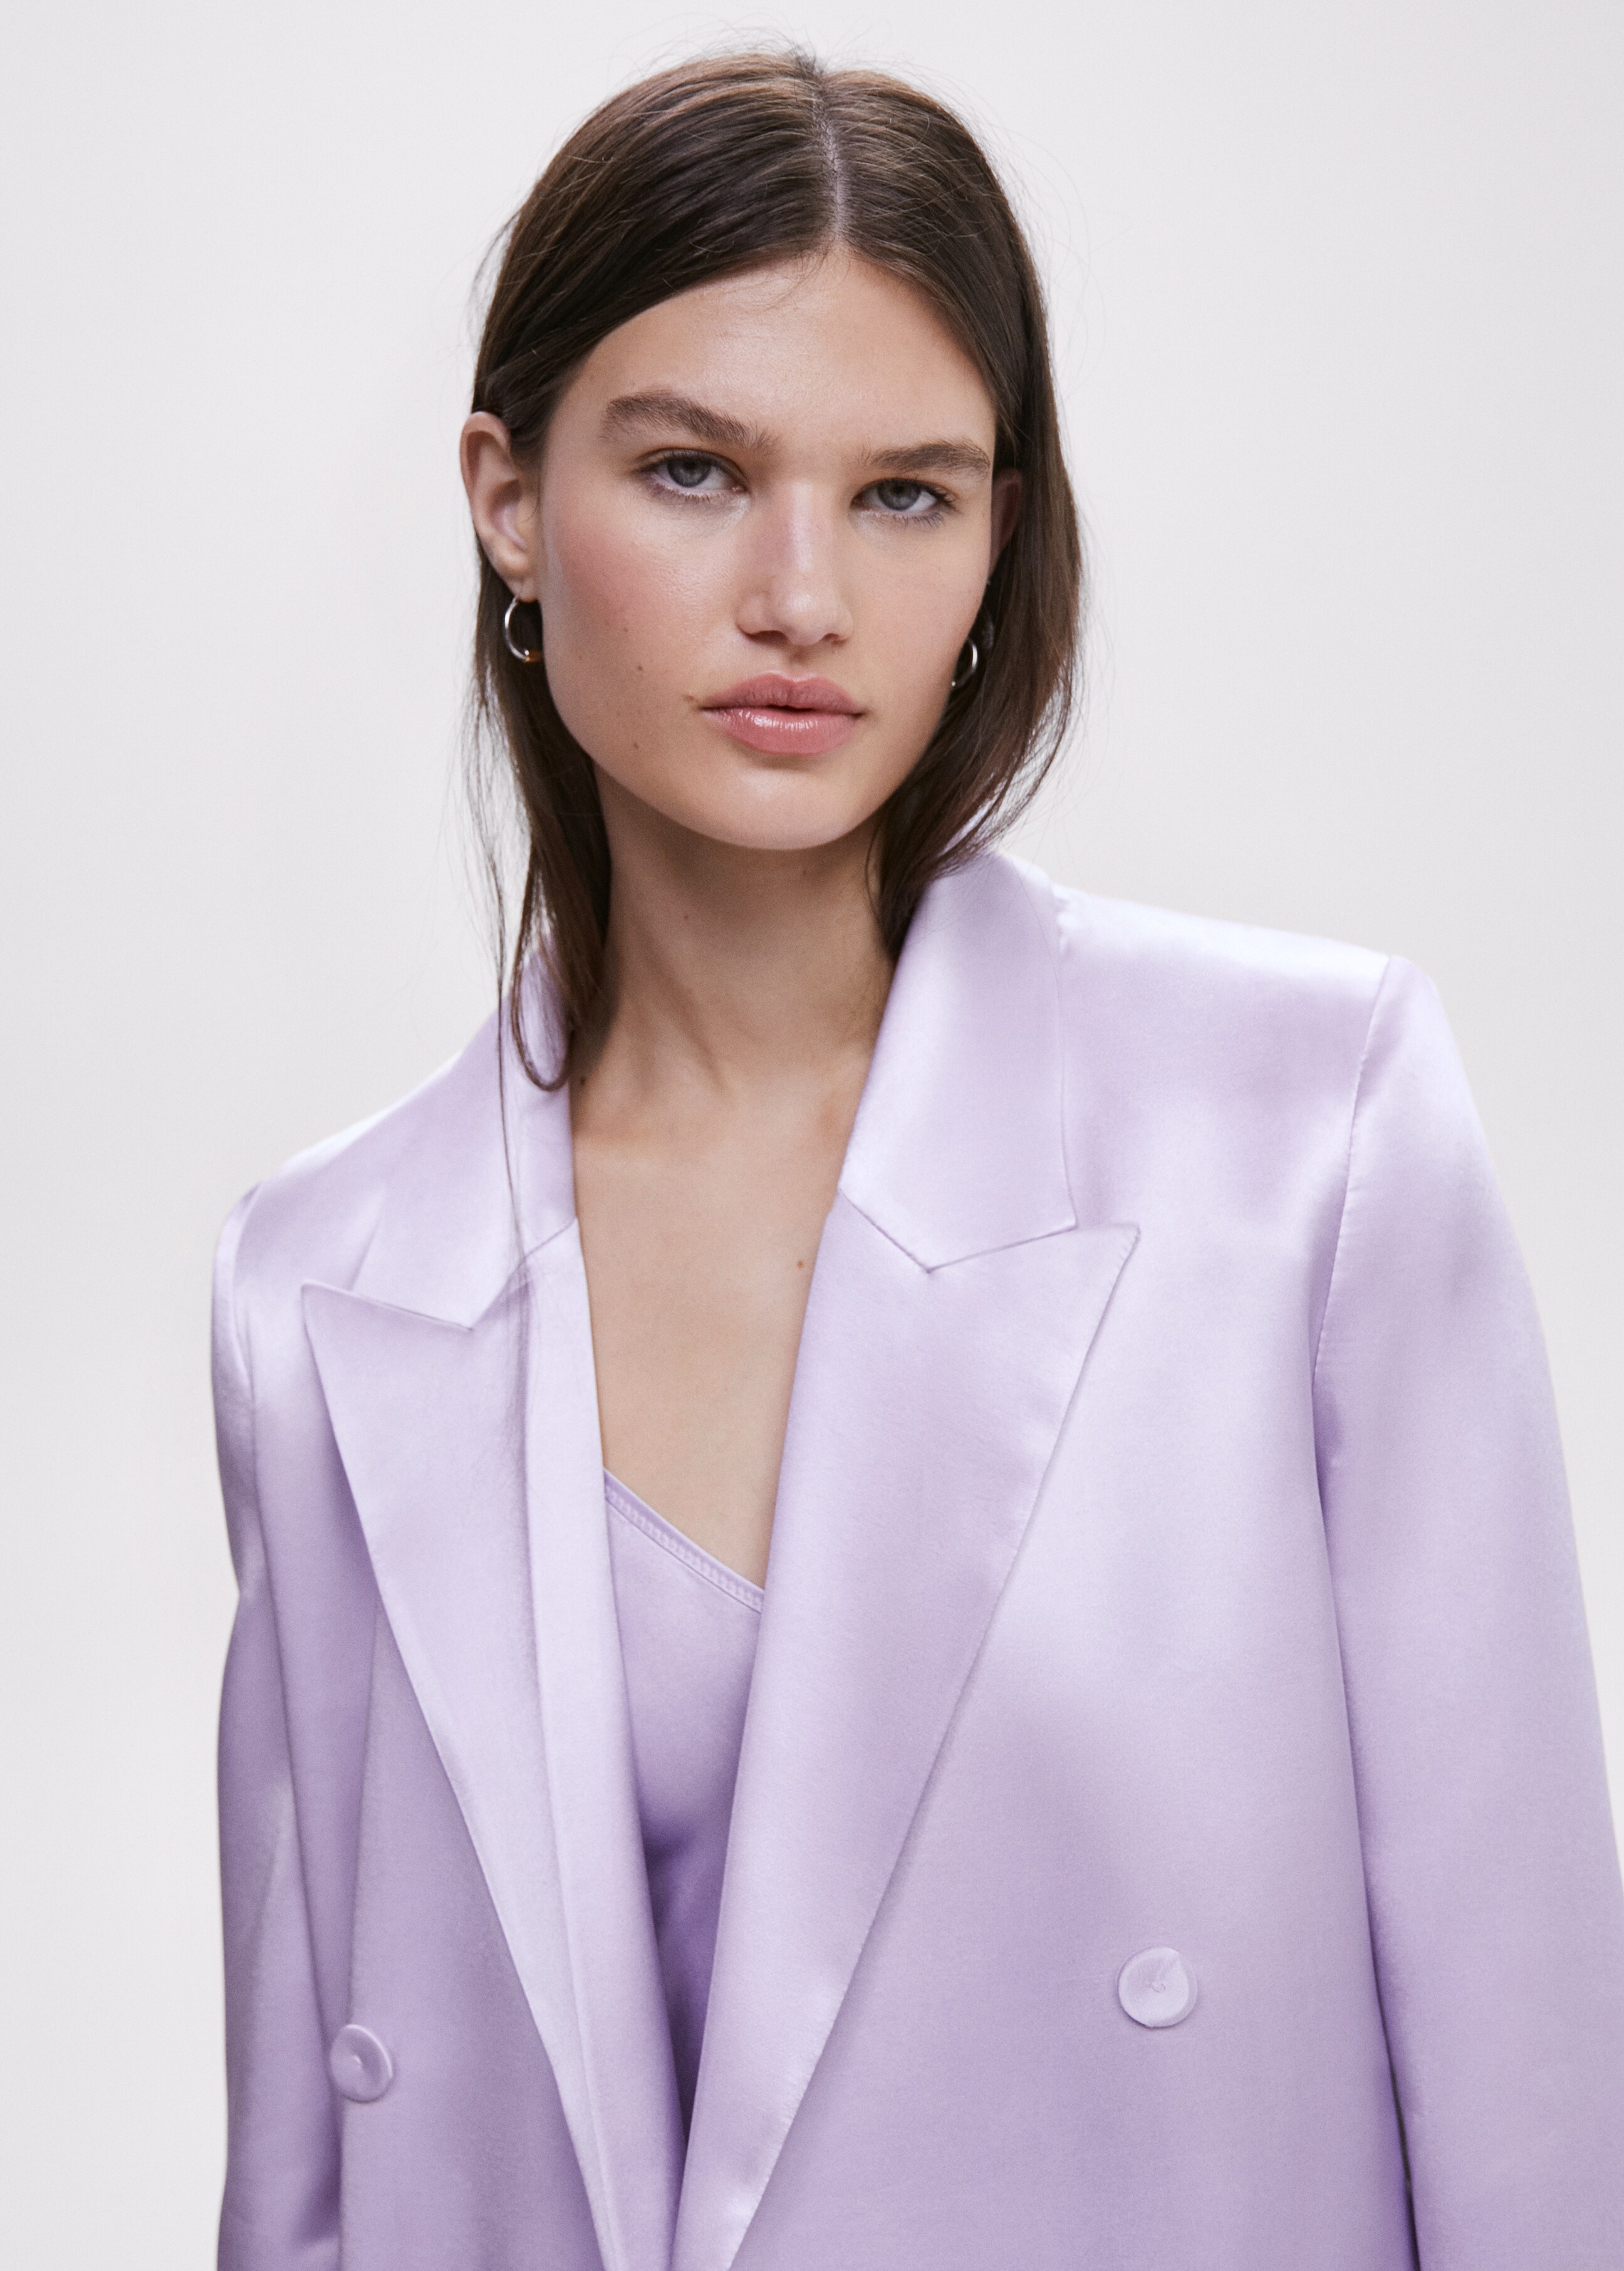 Satin-finish suit jacket - Details of the article 1